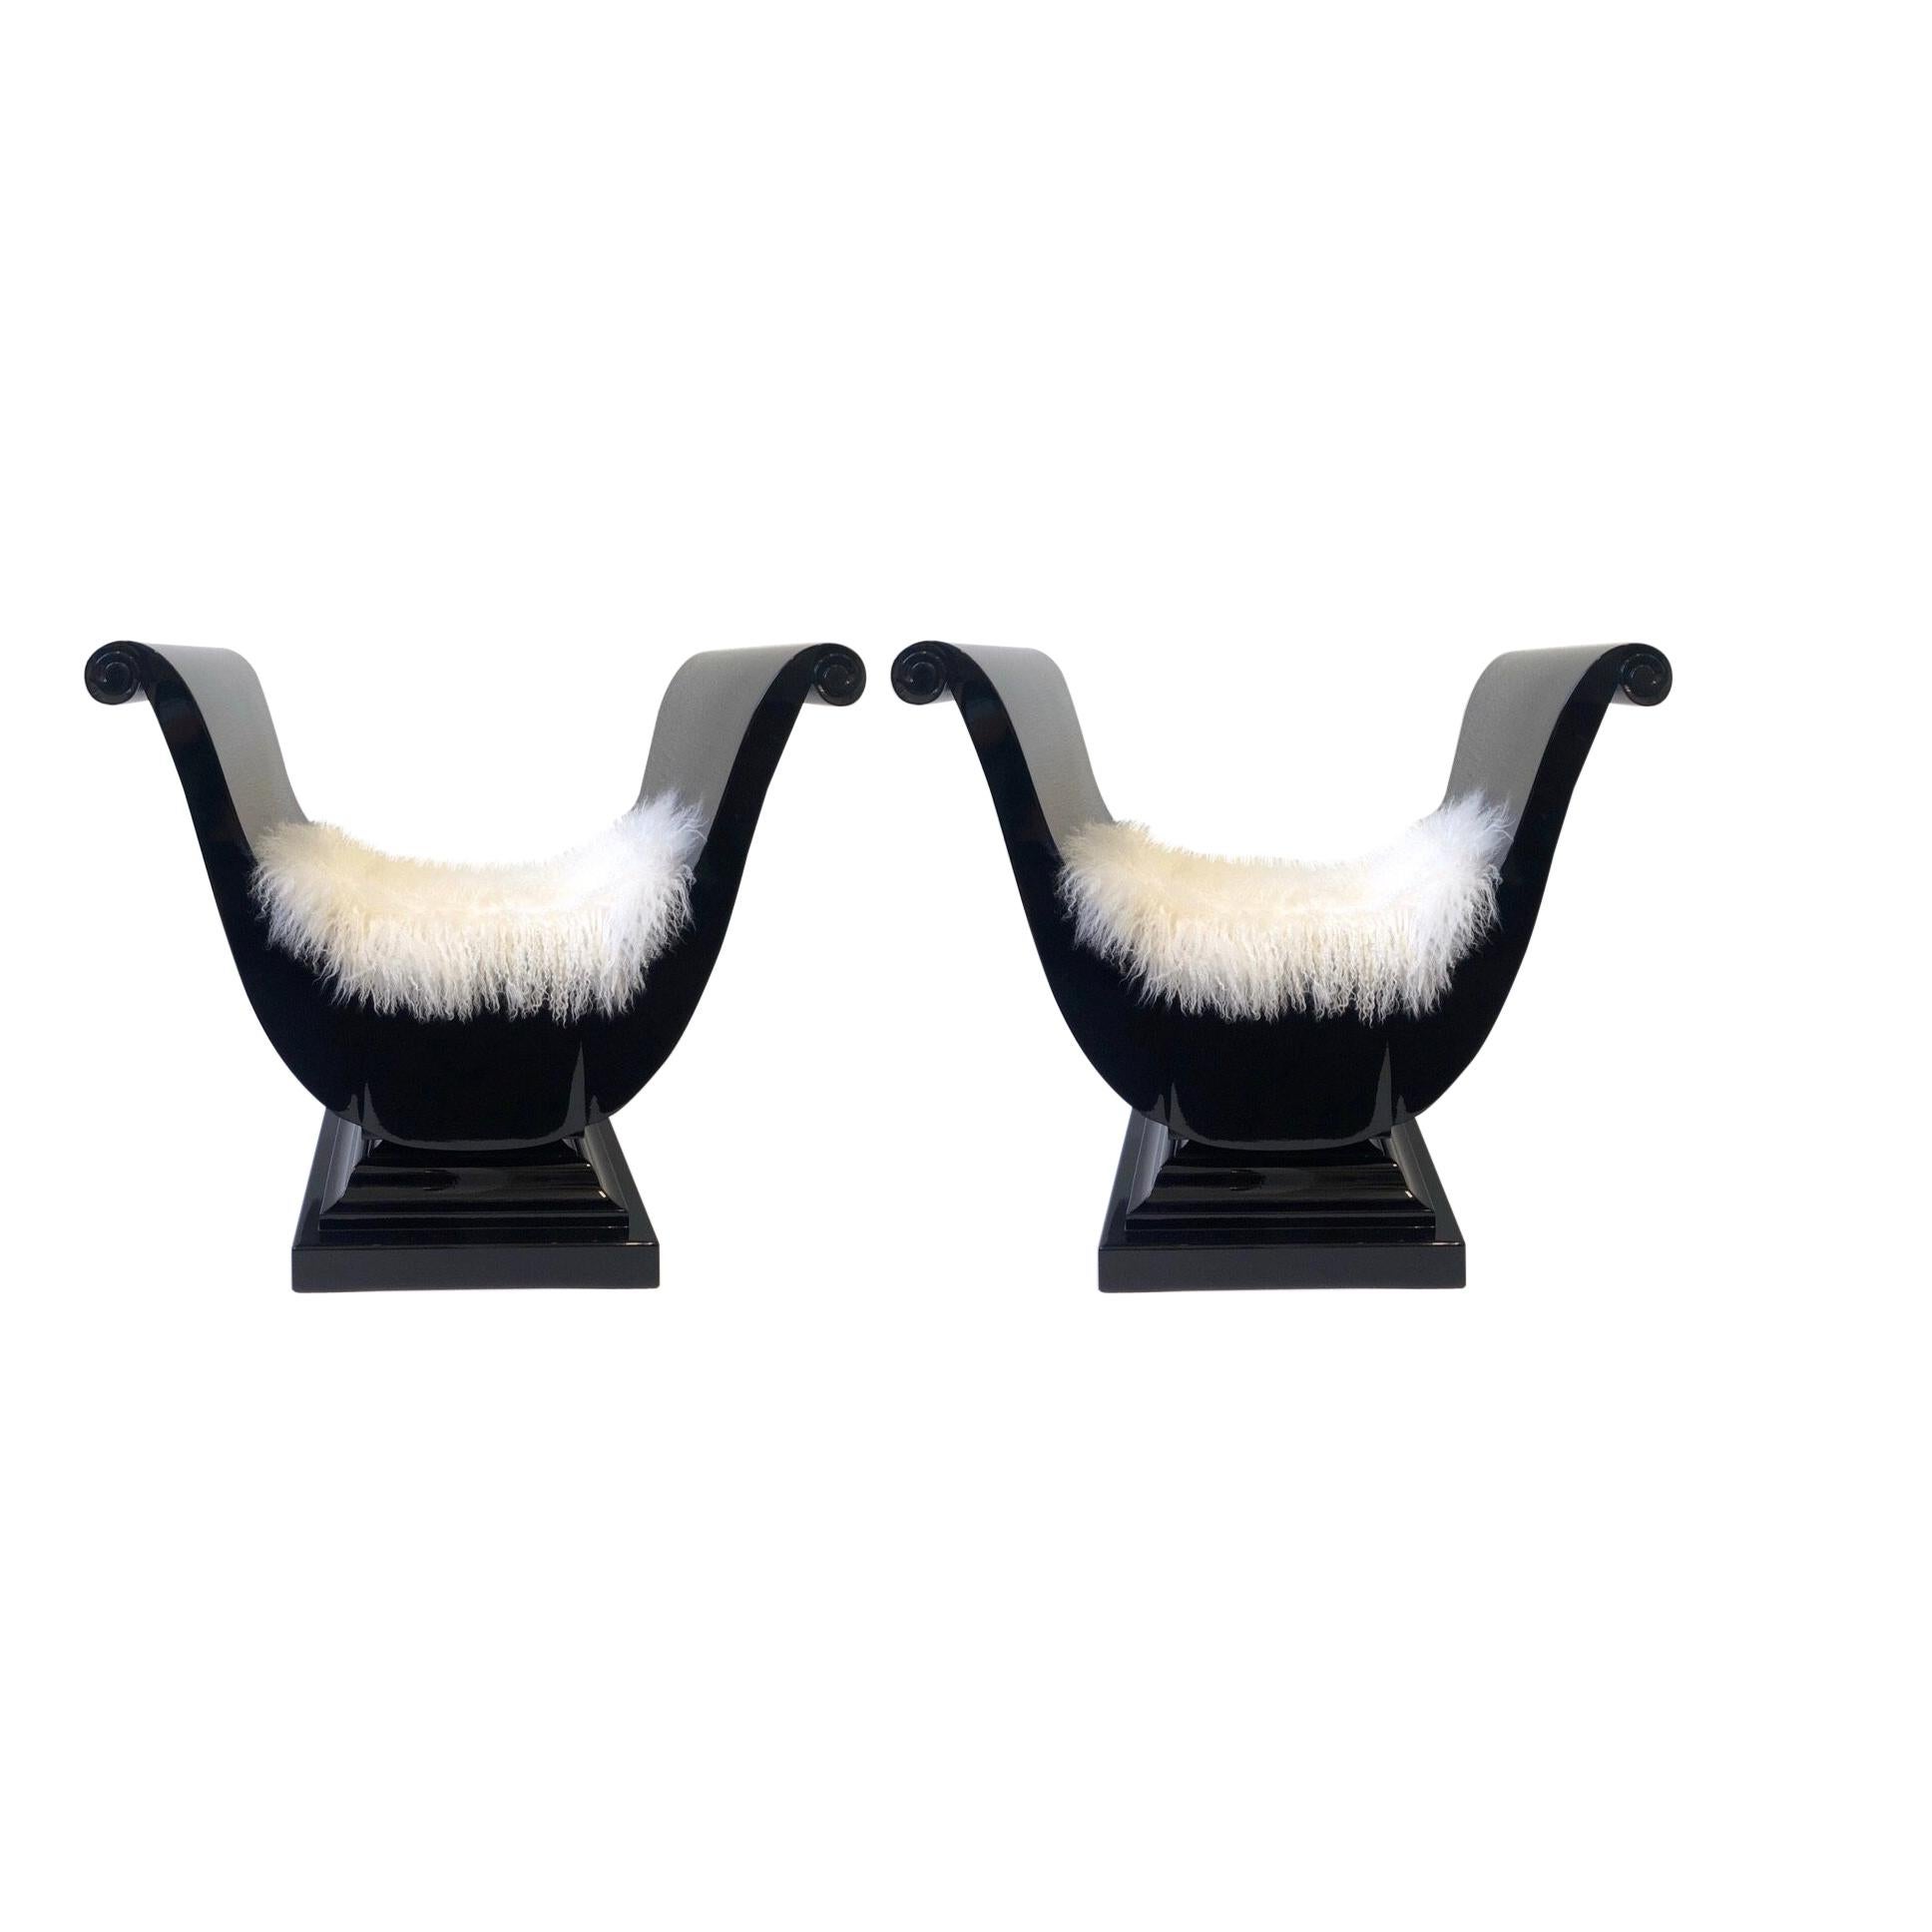 Pair of Black Lacquered Harlow Throne Chairs by Blackman Cruz